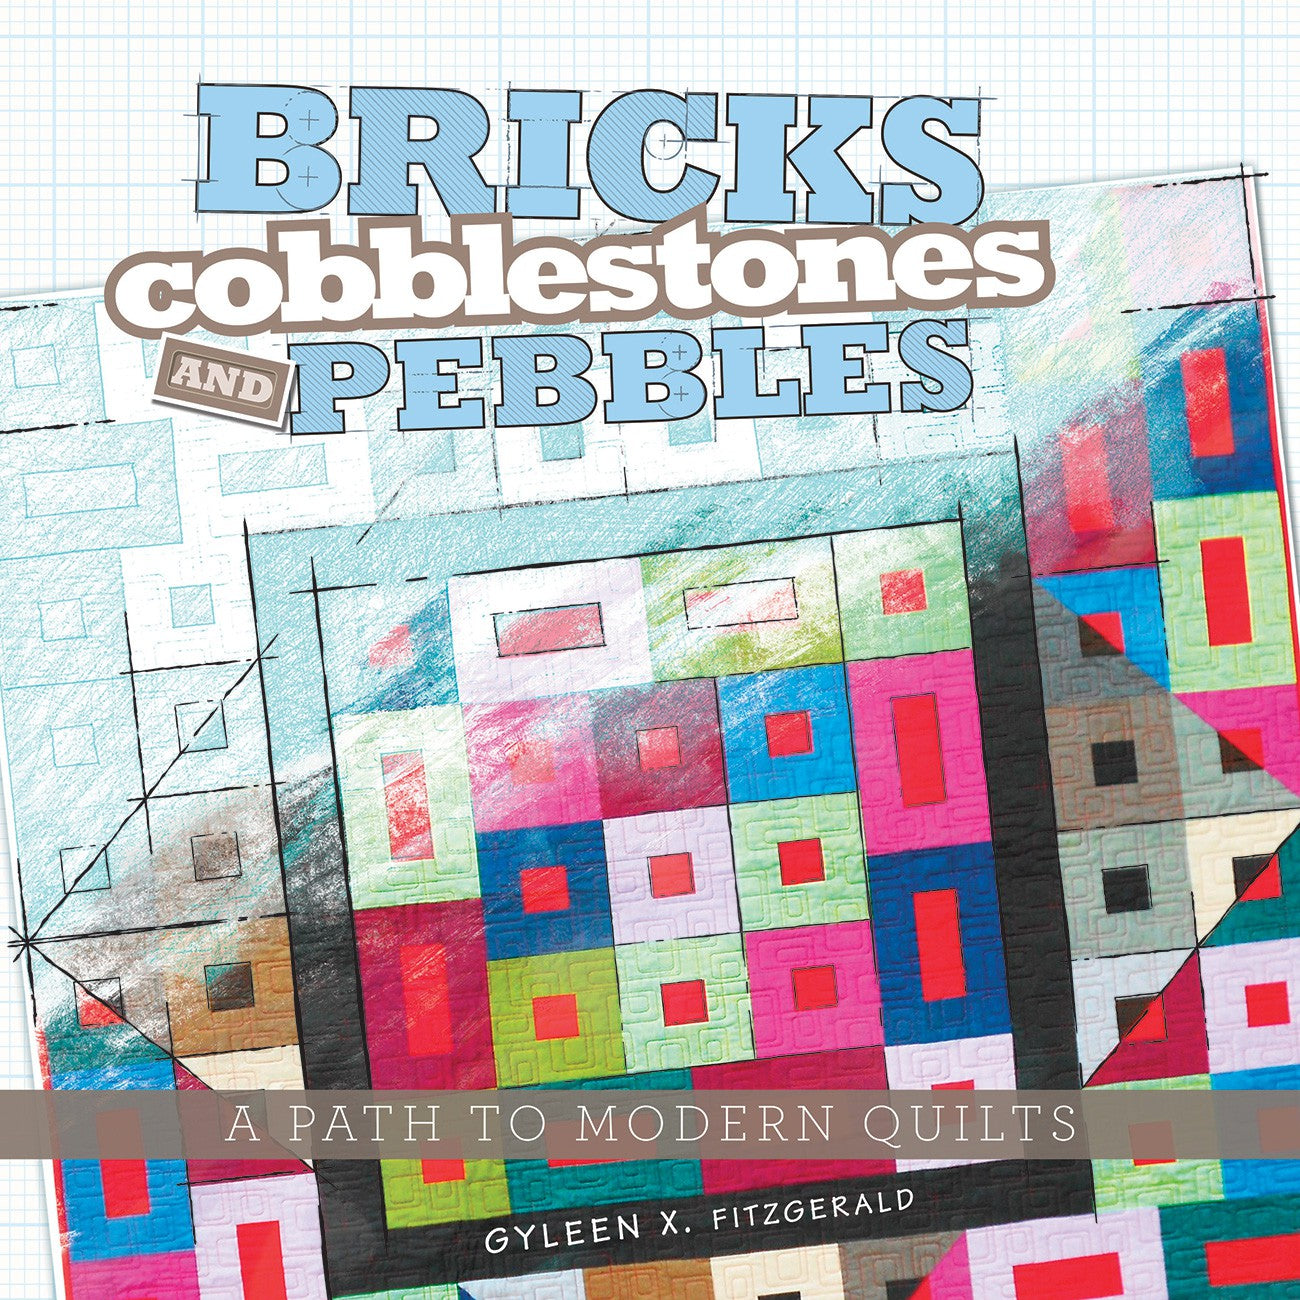 Bricks, Cobblestones and Pebbles Quilt Pattern Book by Gyleen X Fitzgerald of Colourful Stitches - Dings & Dents